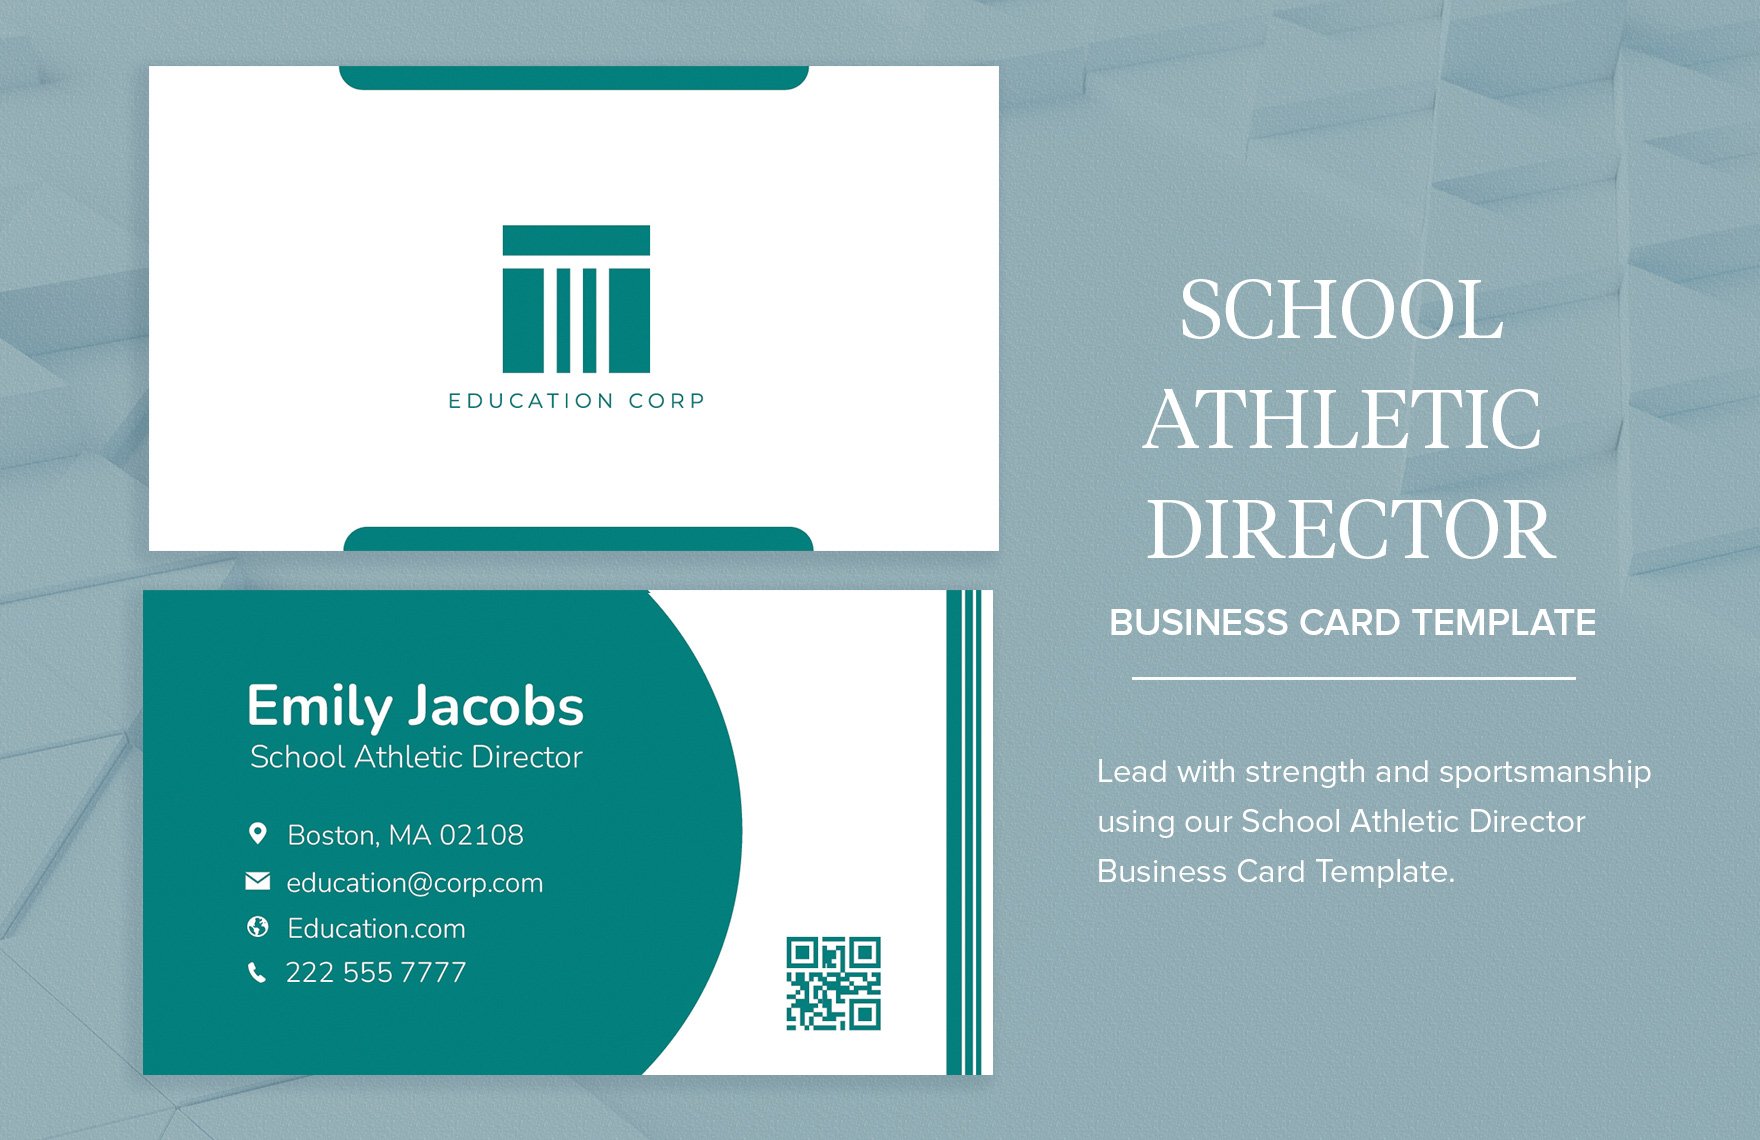 School Athletic Director Business Card Template